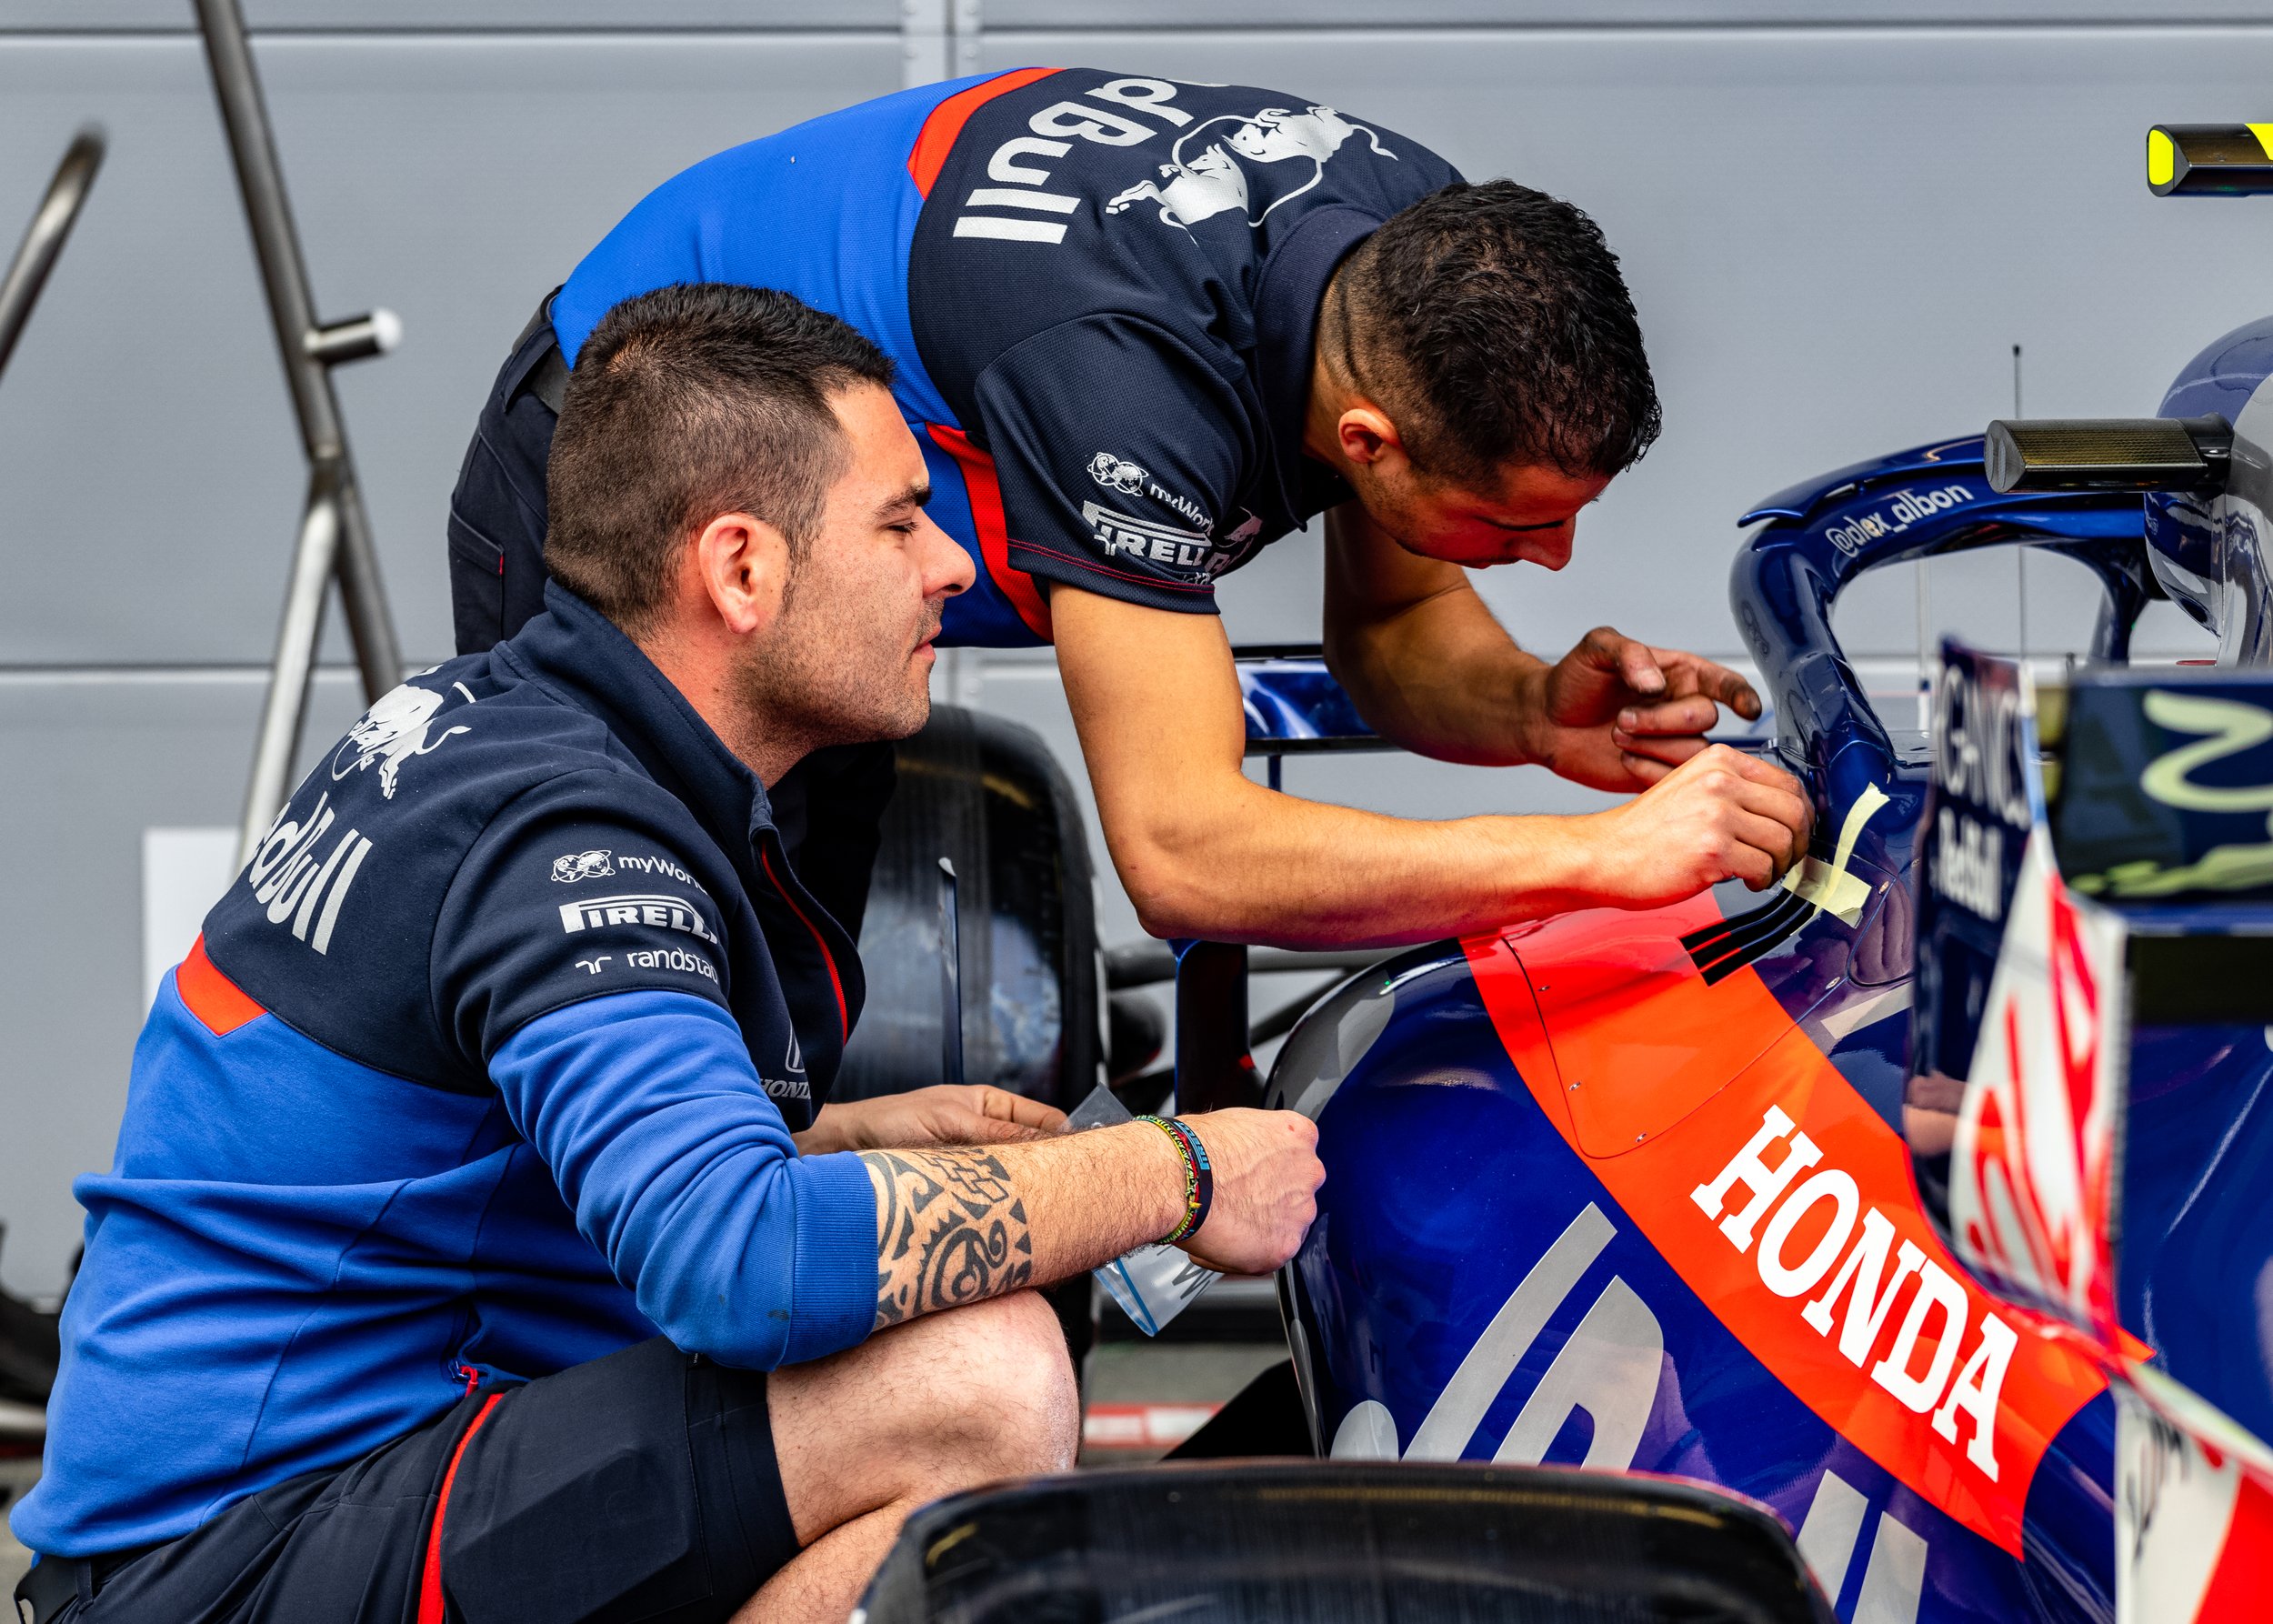 Toro Rosso engineers work on the car during the Azerbaijan race weekend in 2019